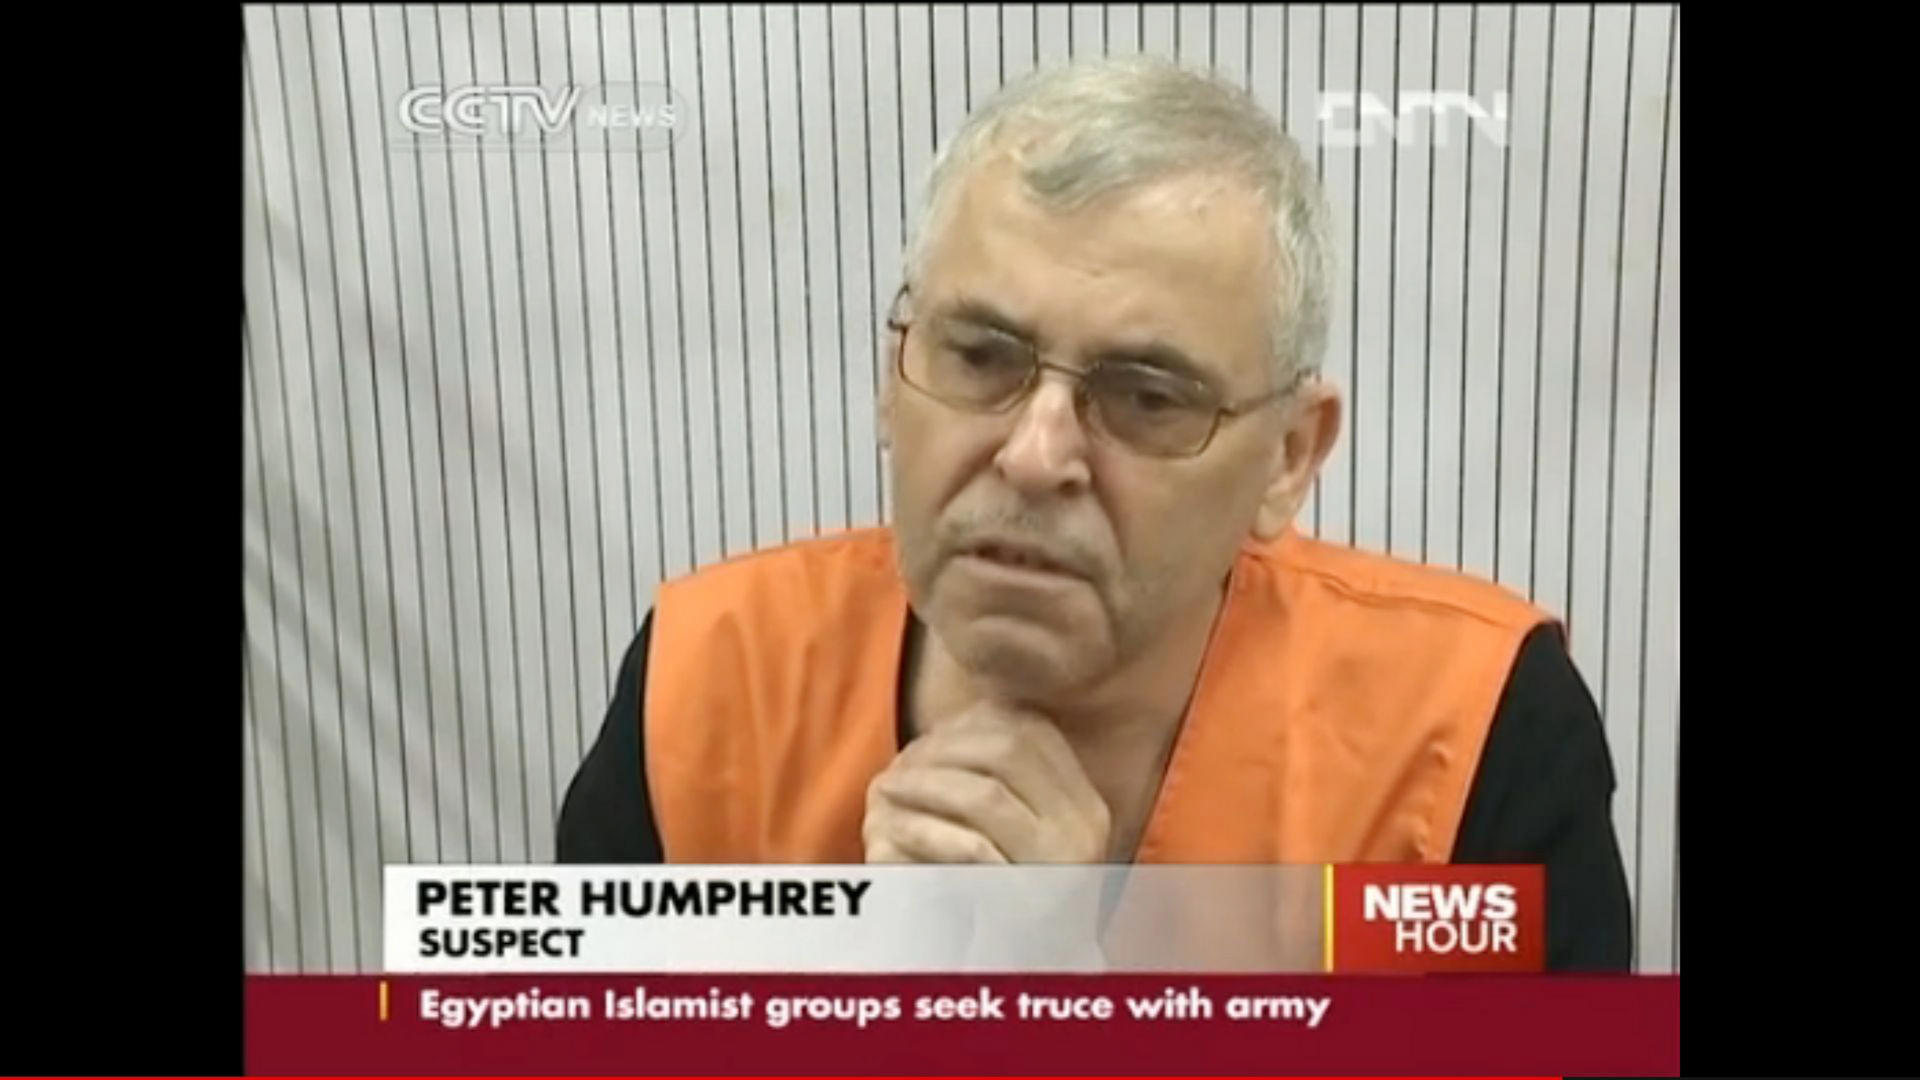 Peter Humphrey and his wife will be tried for illegally obtaining personal information of Chinese citizens.